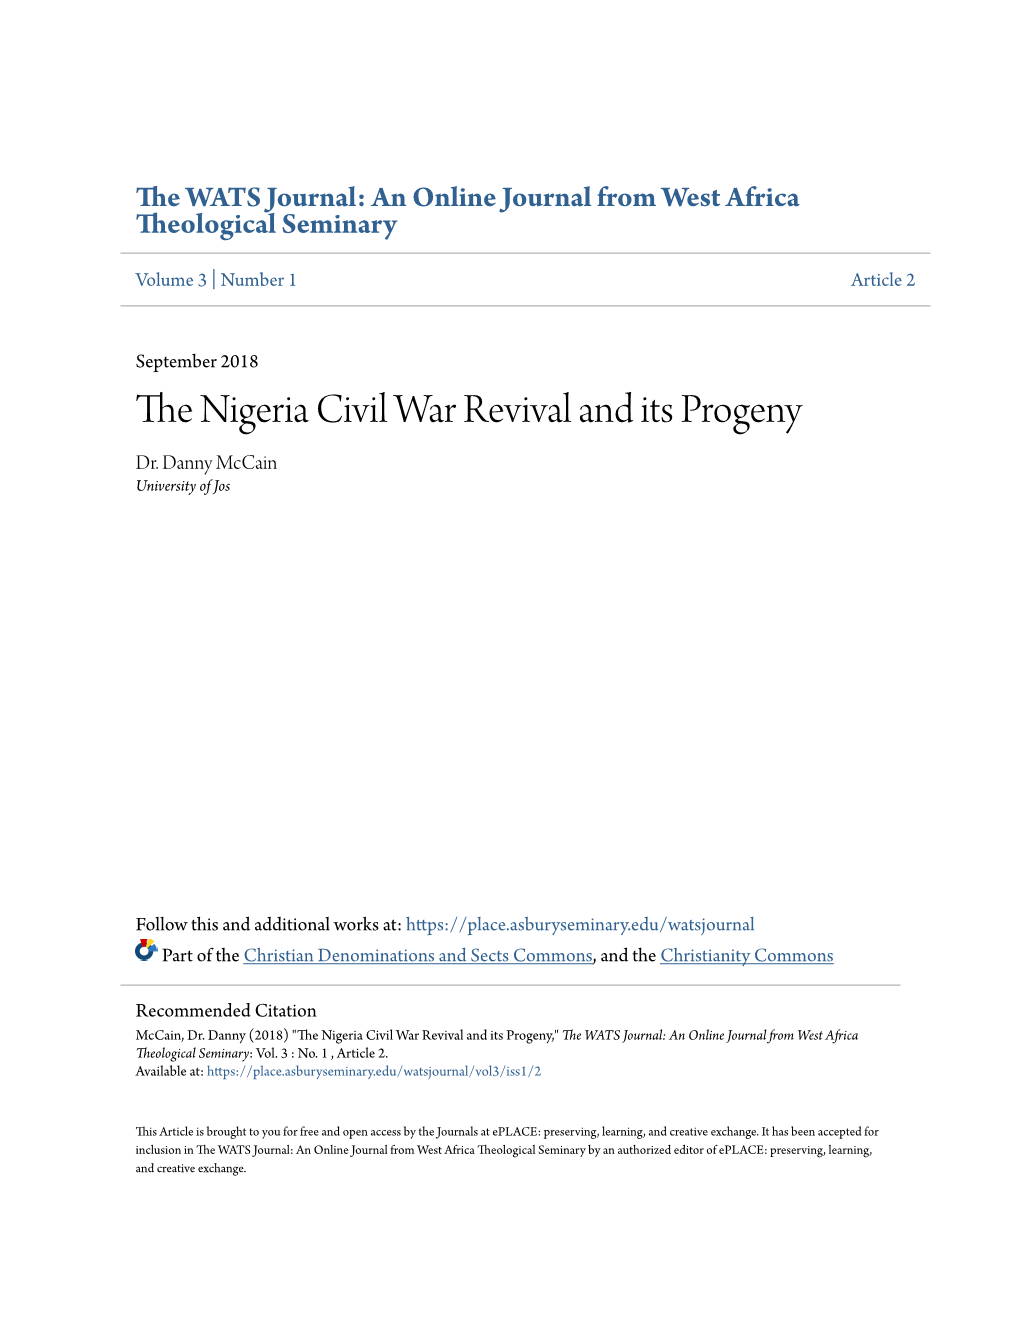 The Nigeria Civil War Revival and Its Progeny 1 DR